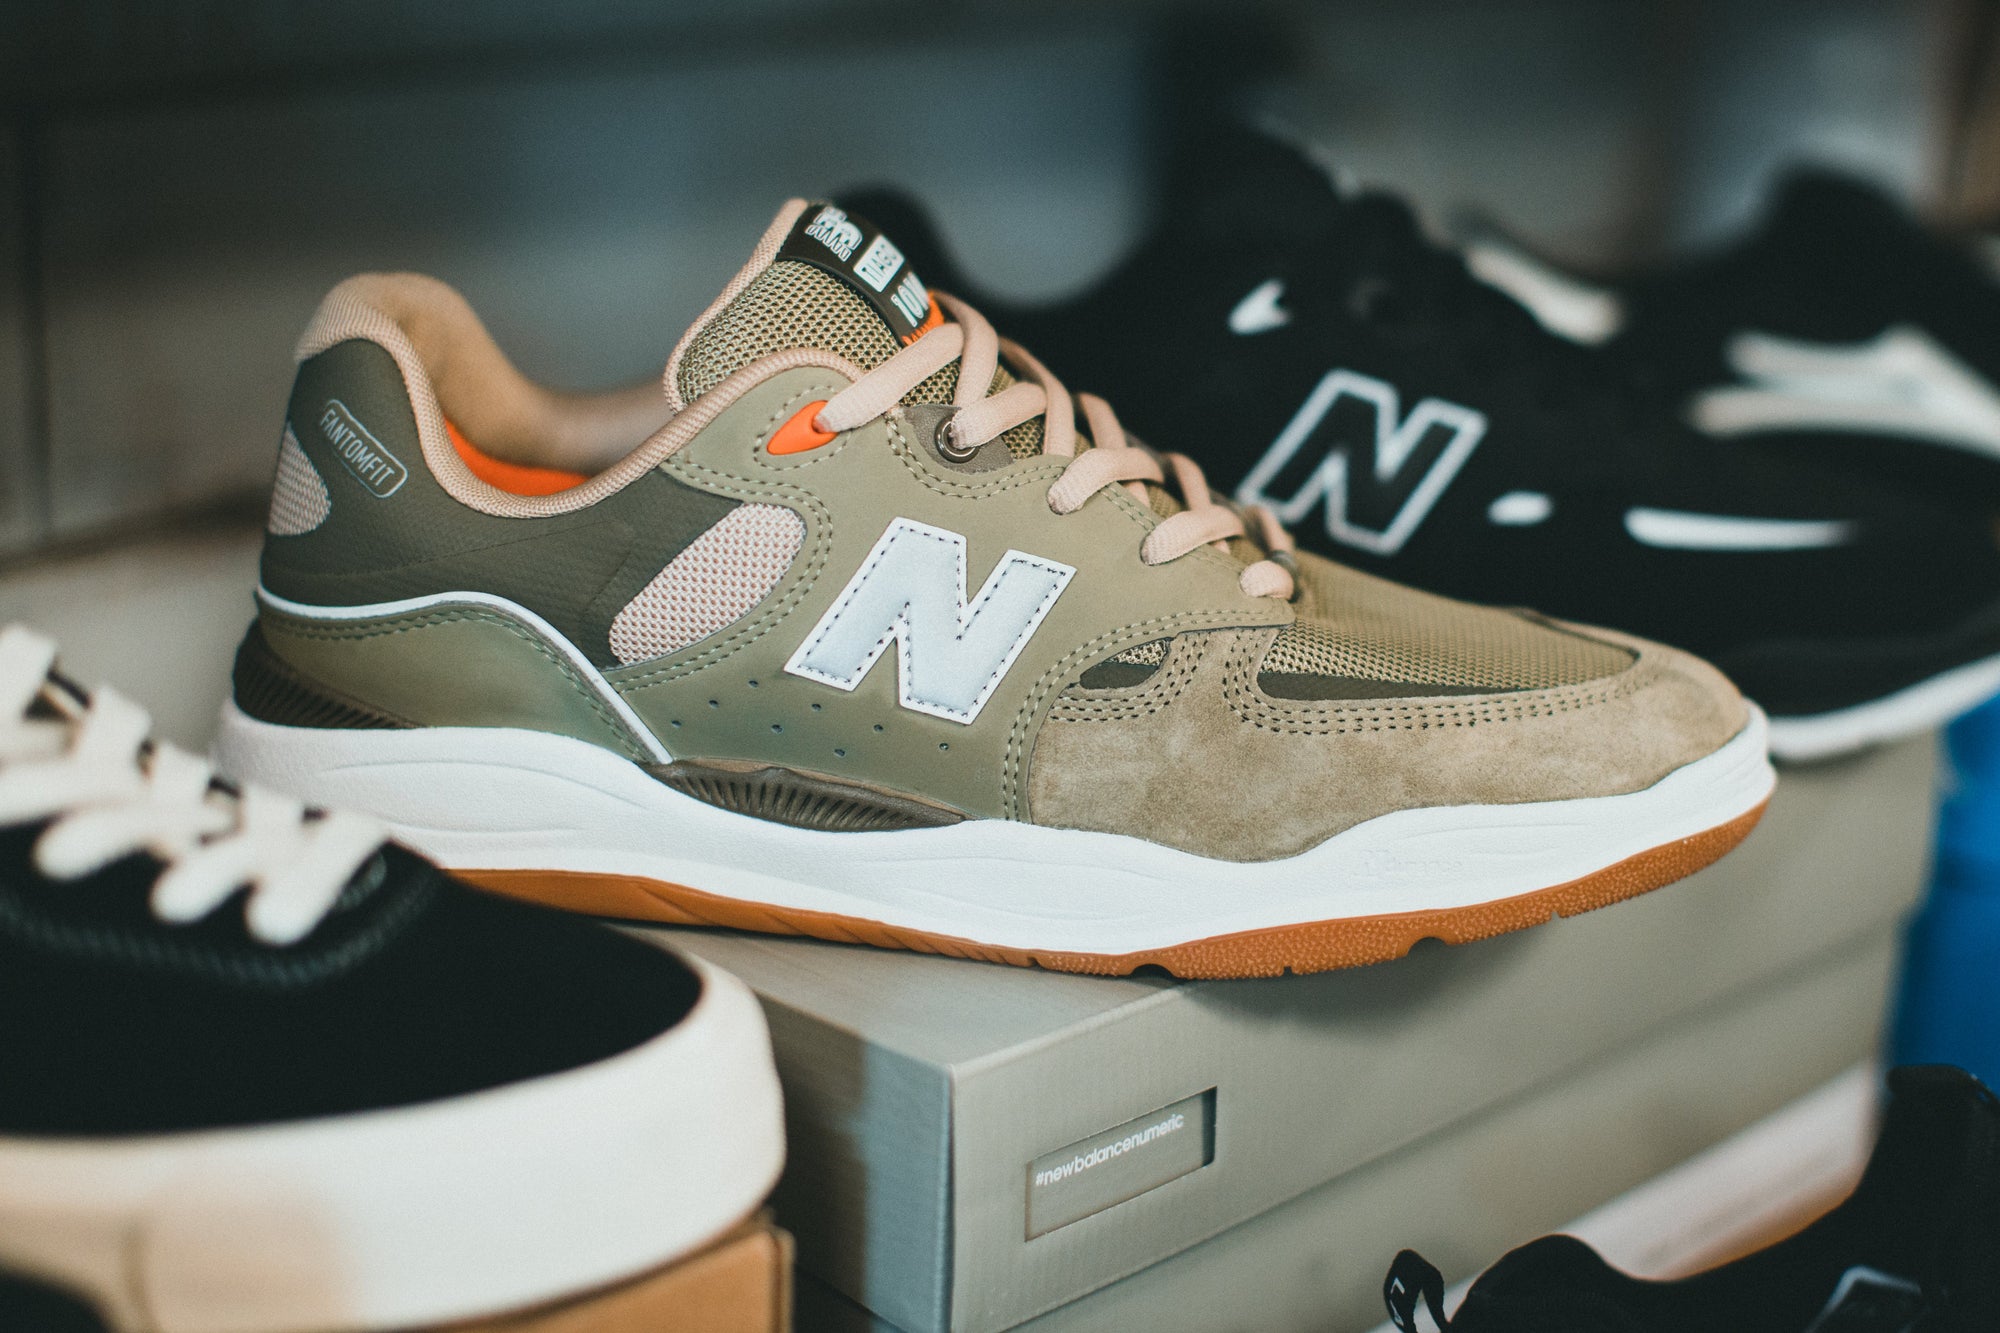 Assorted New Balance trainers featuring diverse styles for various preferences, reflecting the brand's dedication to comfort and fashion.